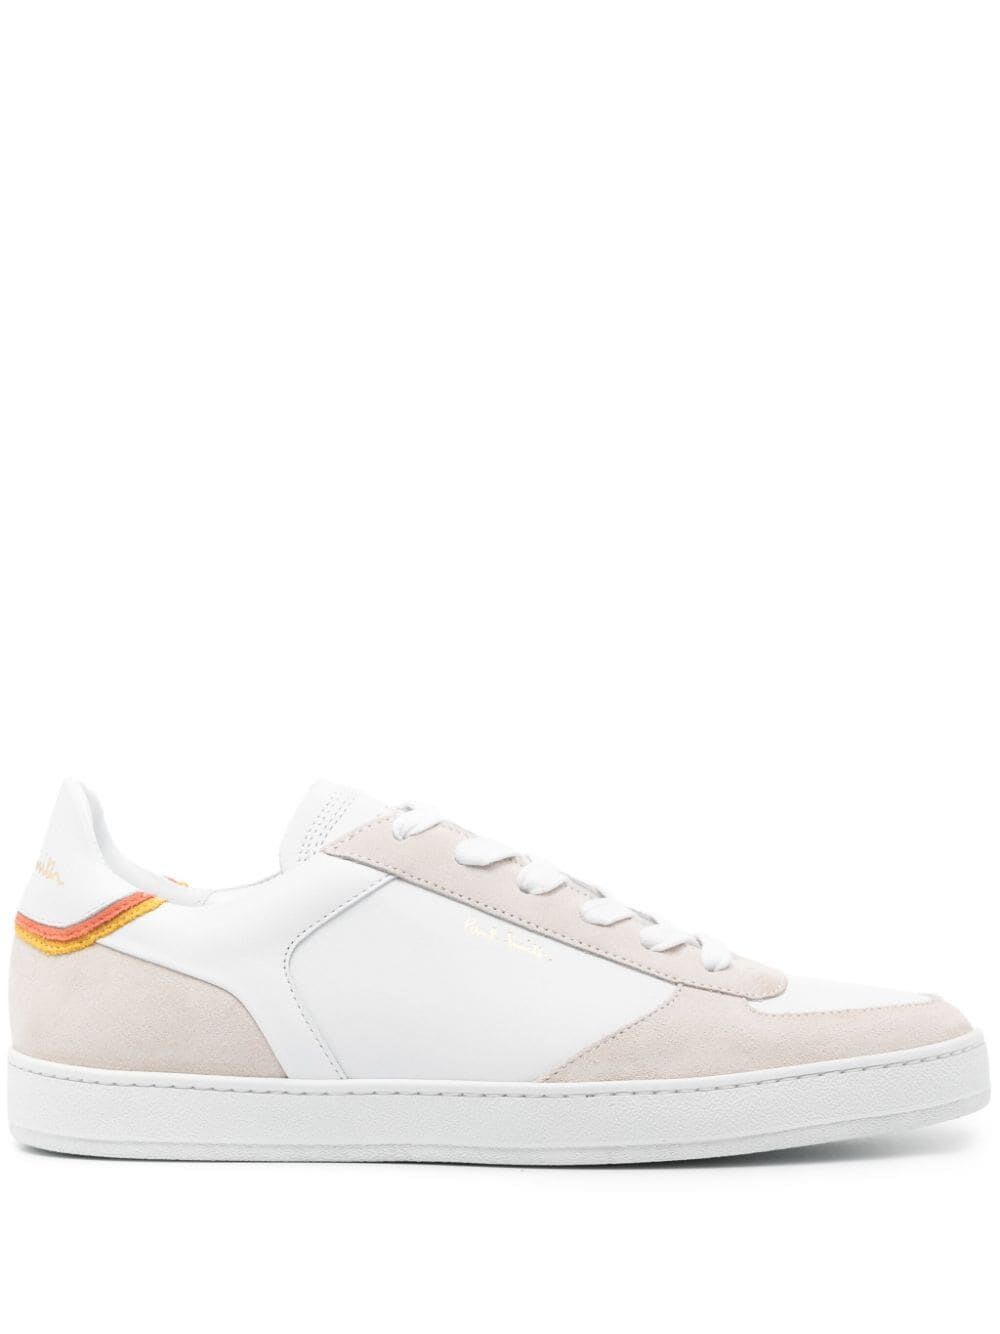 Shop Paul Smith Mens Shoe Destry White In Whites